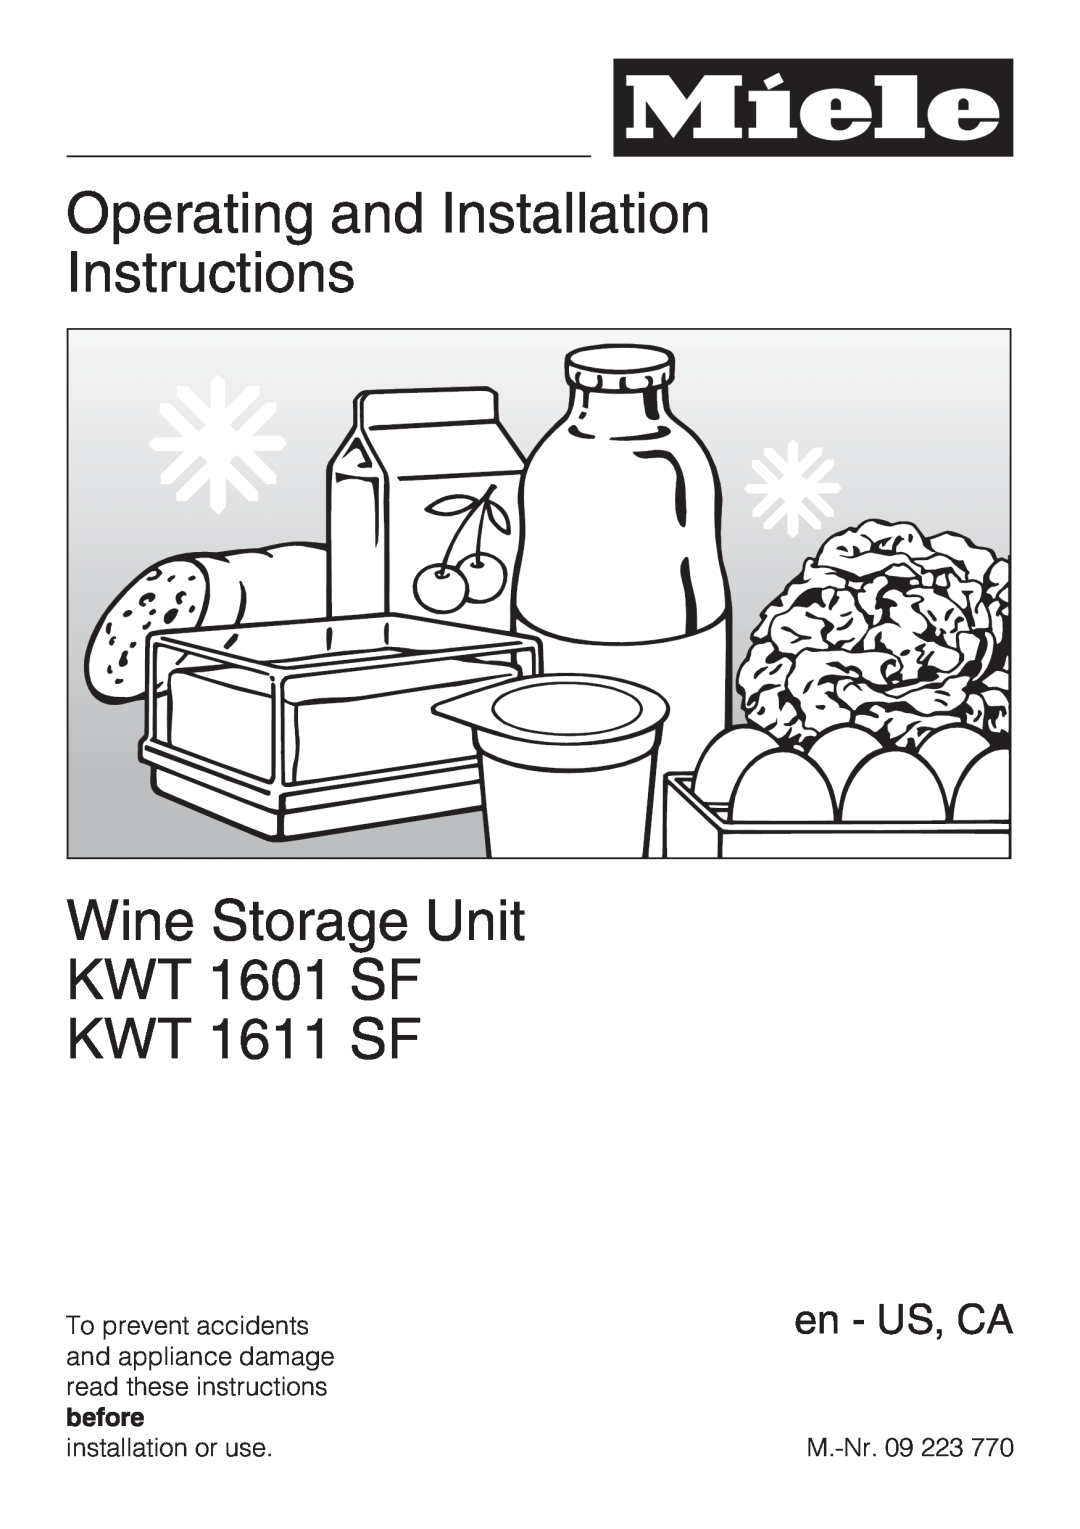 Miele KWT 1611 SF, KWT 1601 SF installation instructions Operating and Installation Instructions, en - US, CA 